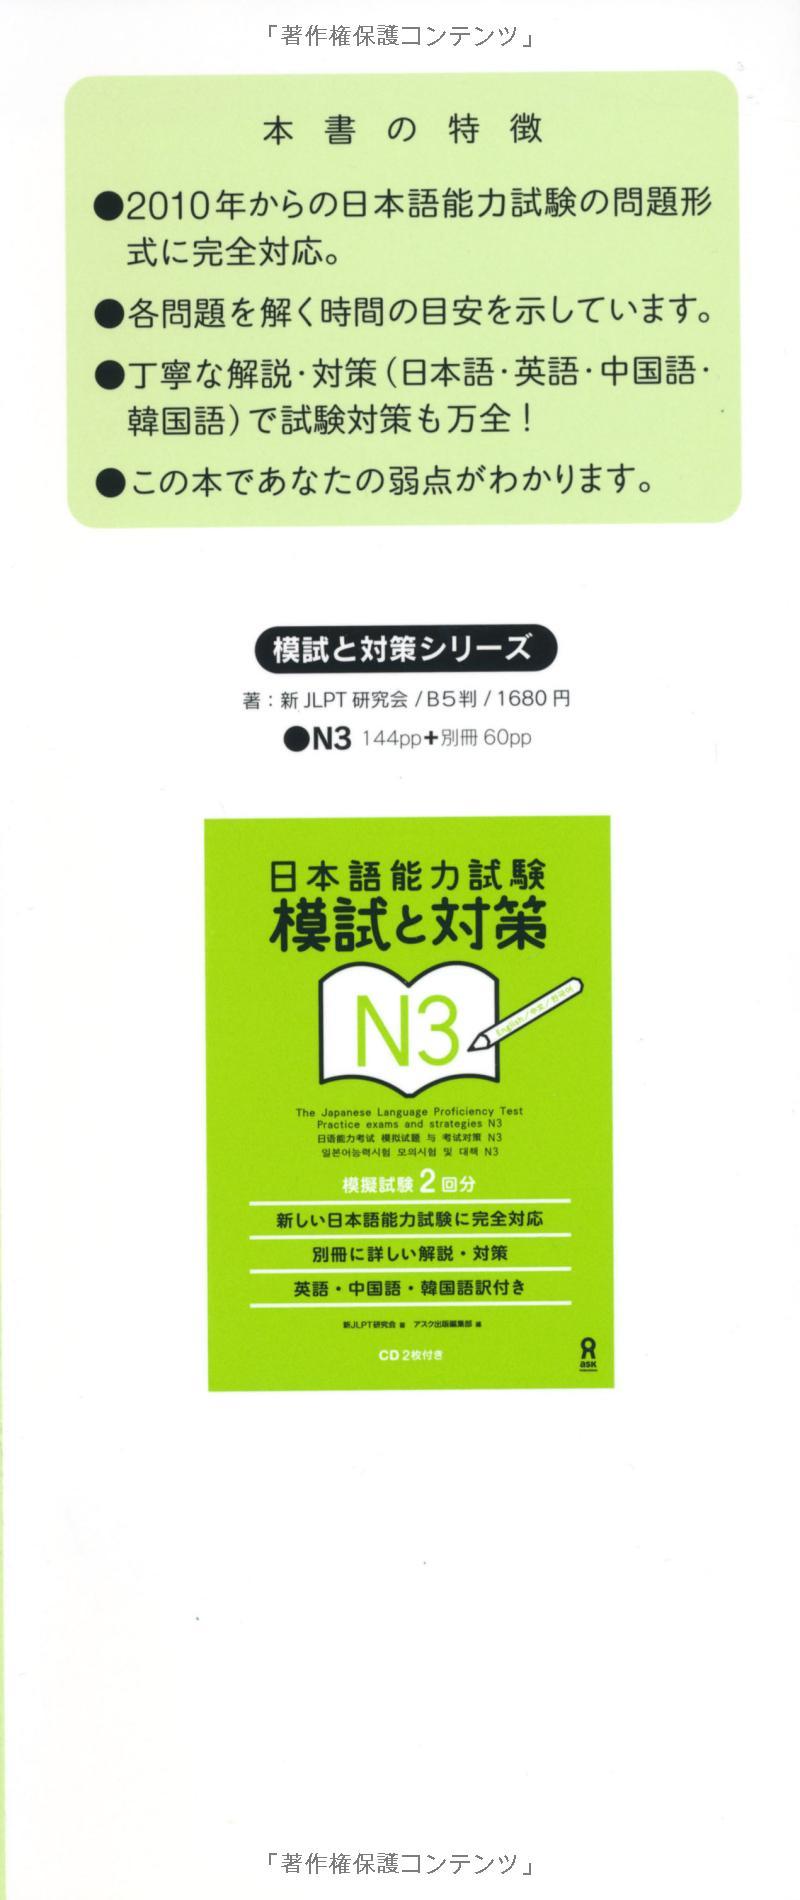 The Japanese Language Proficiency Test Practice Exams And Strategies N3 Vol.2 With 2 CDs (Japanese Edition)